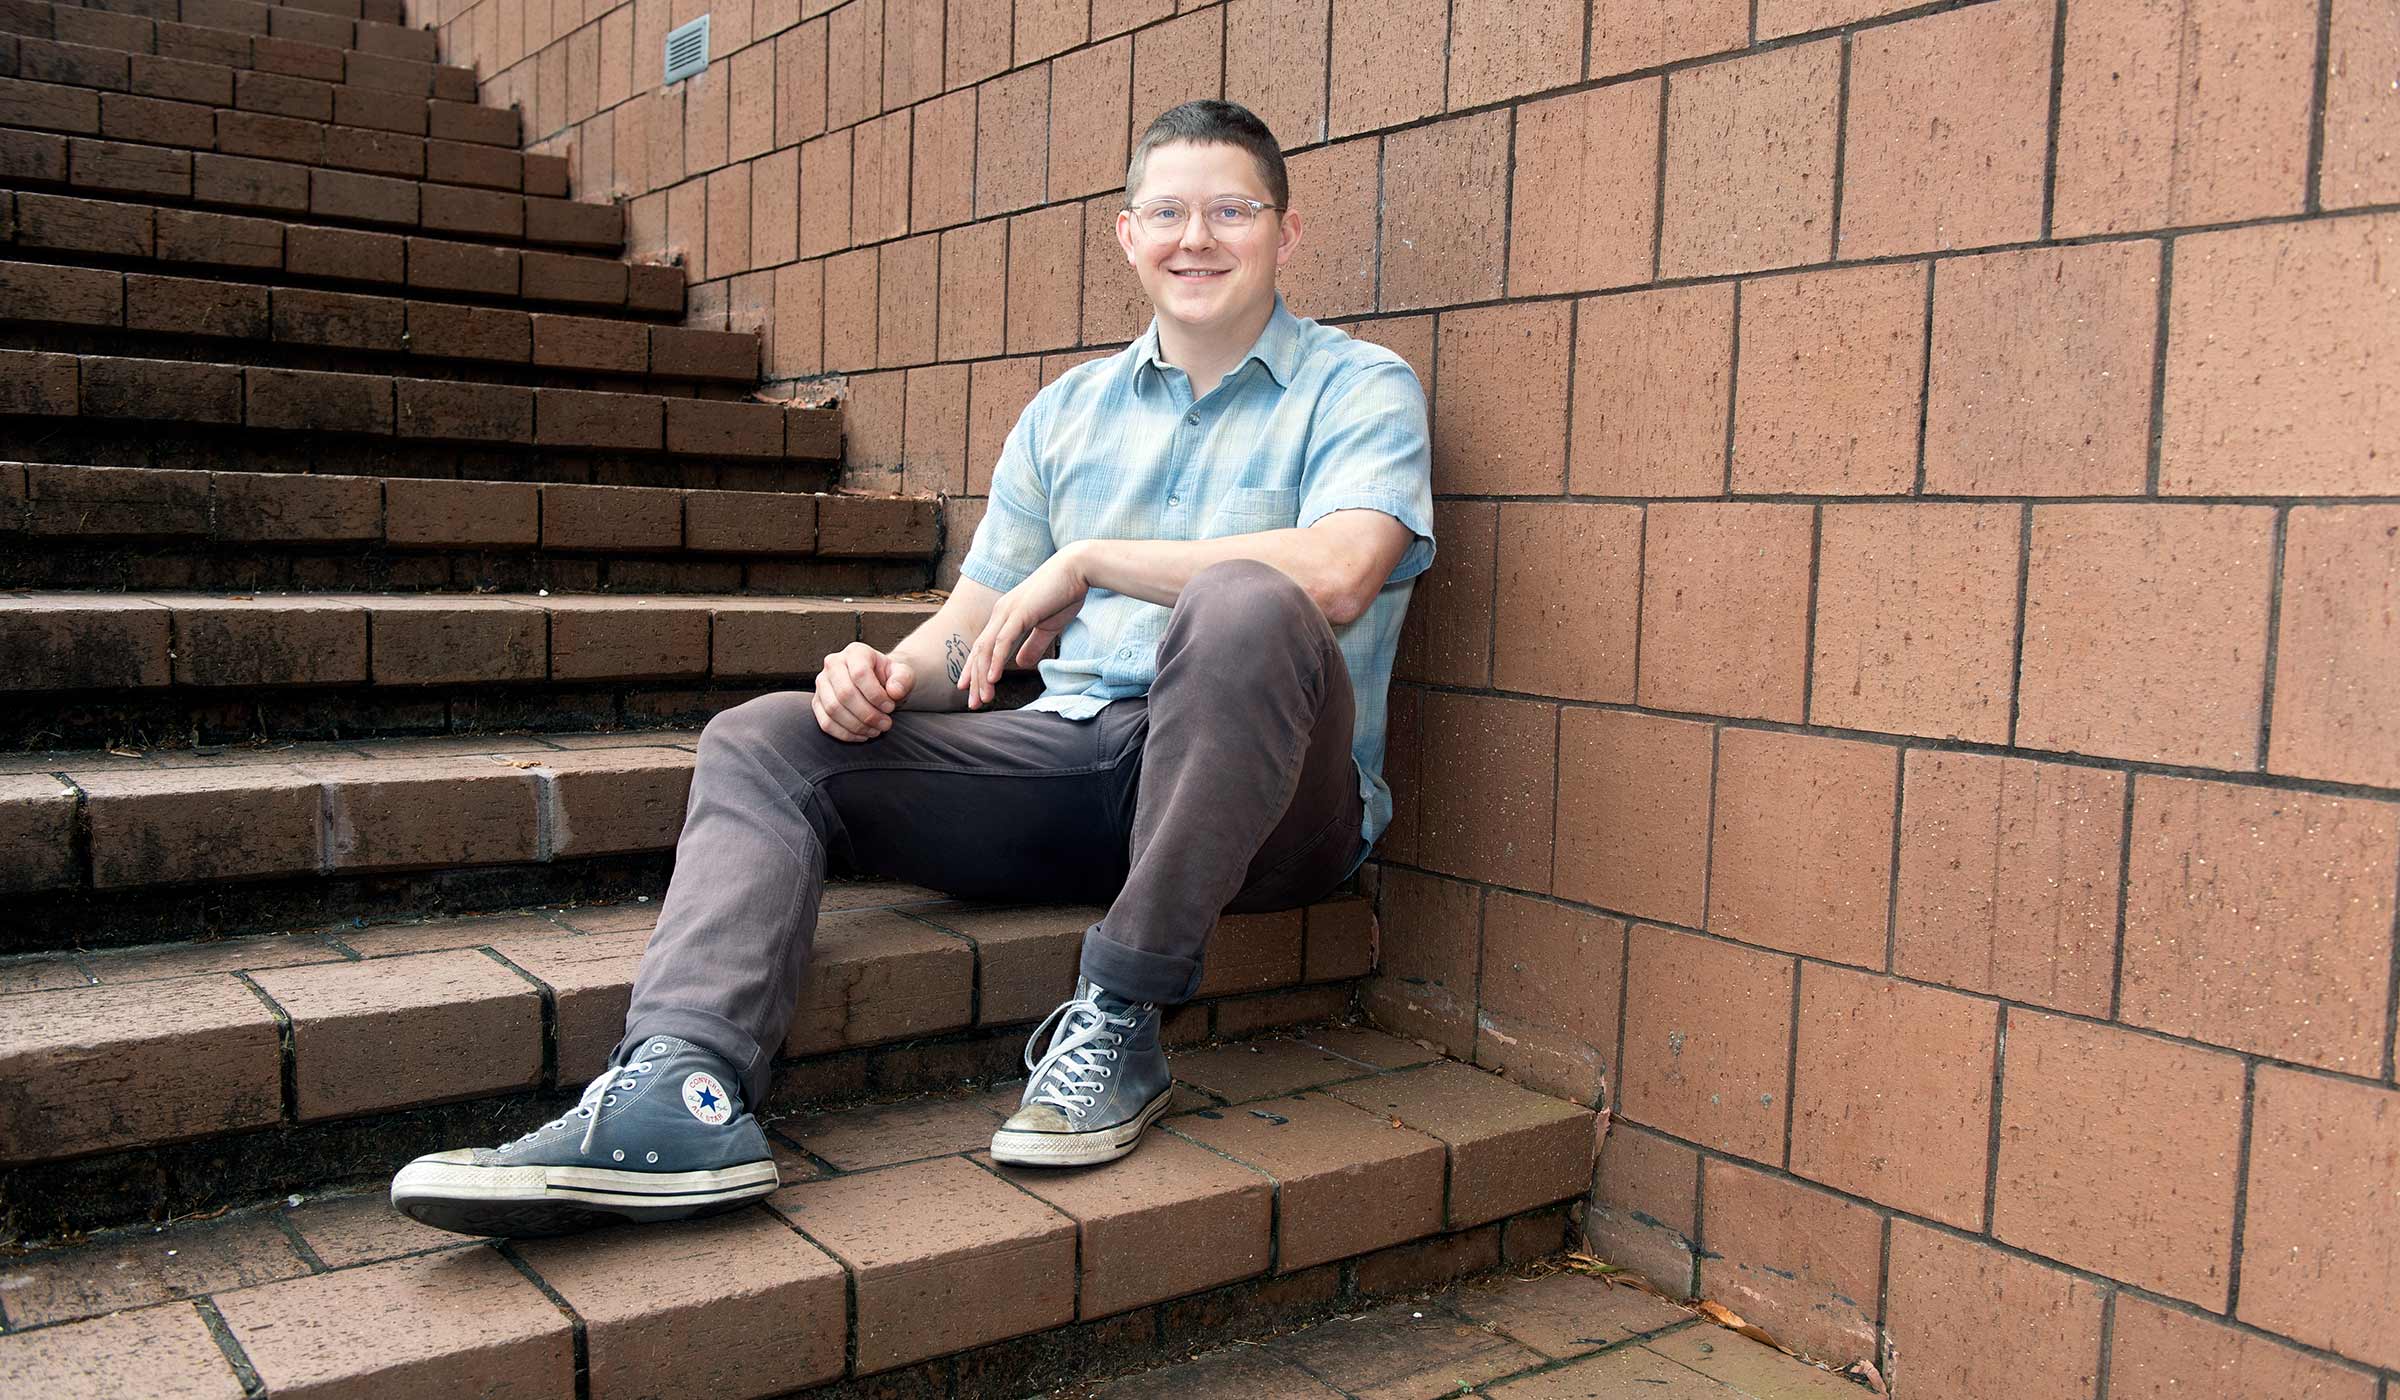 Luke Murray, pictured on the steps of Giles Hall